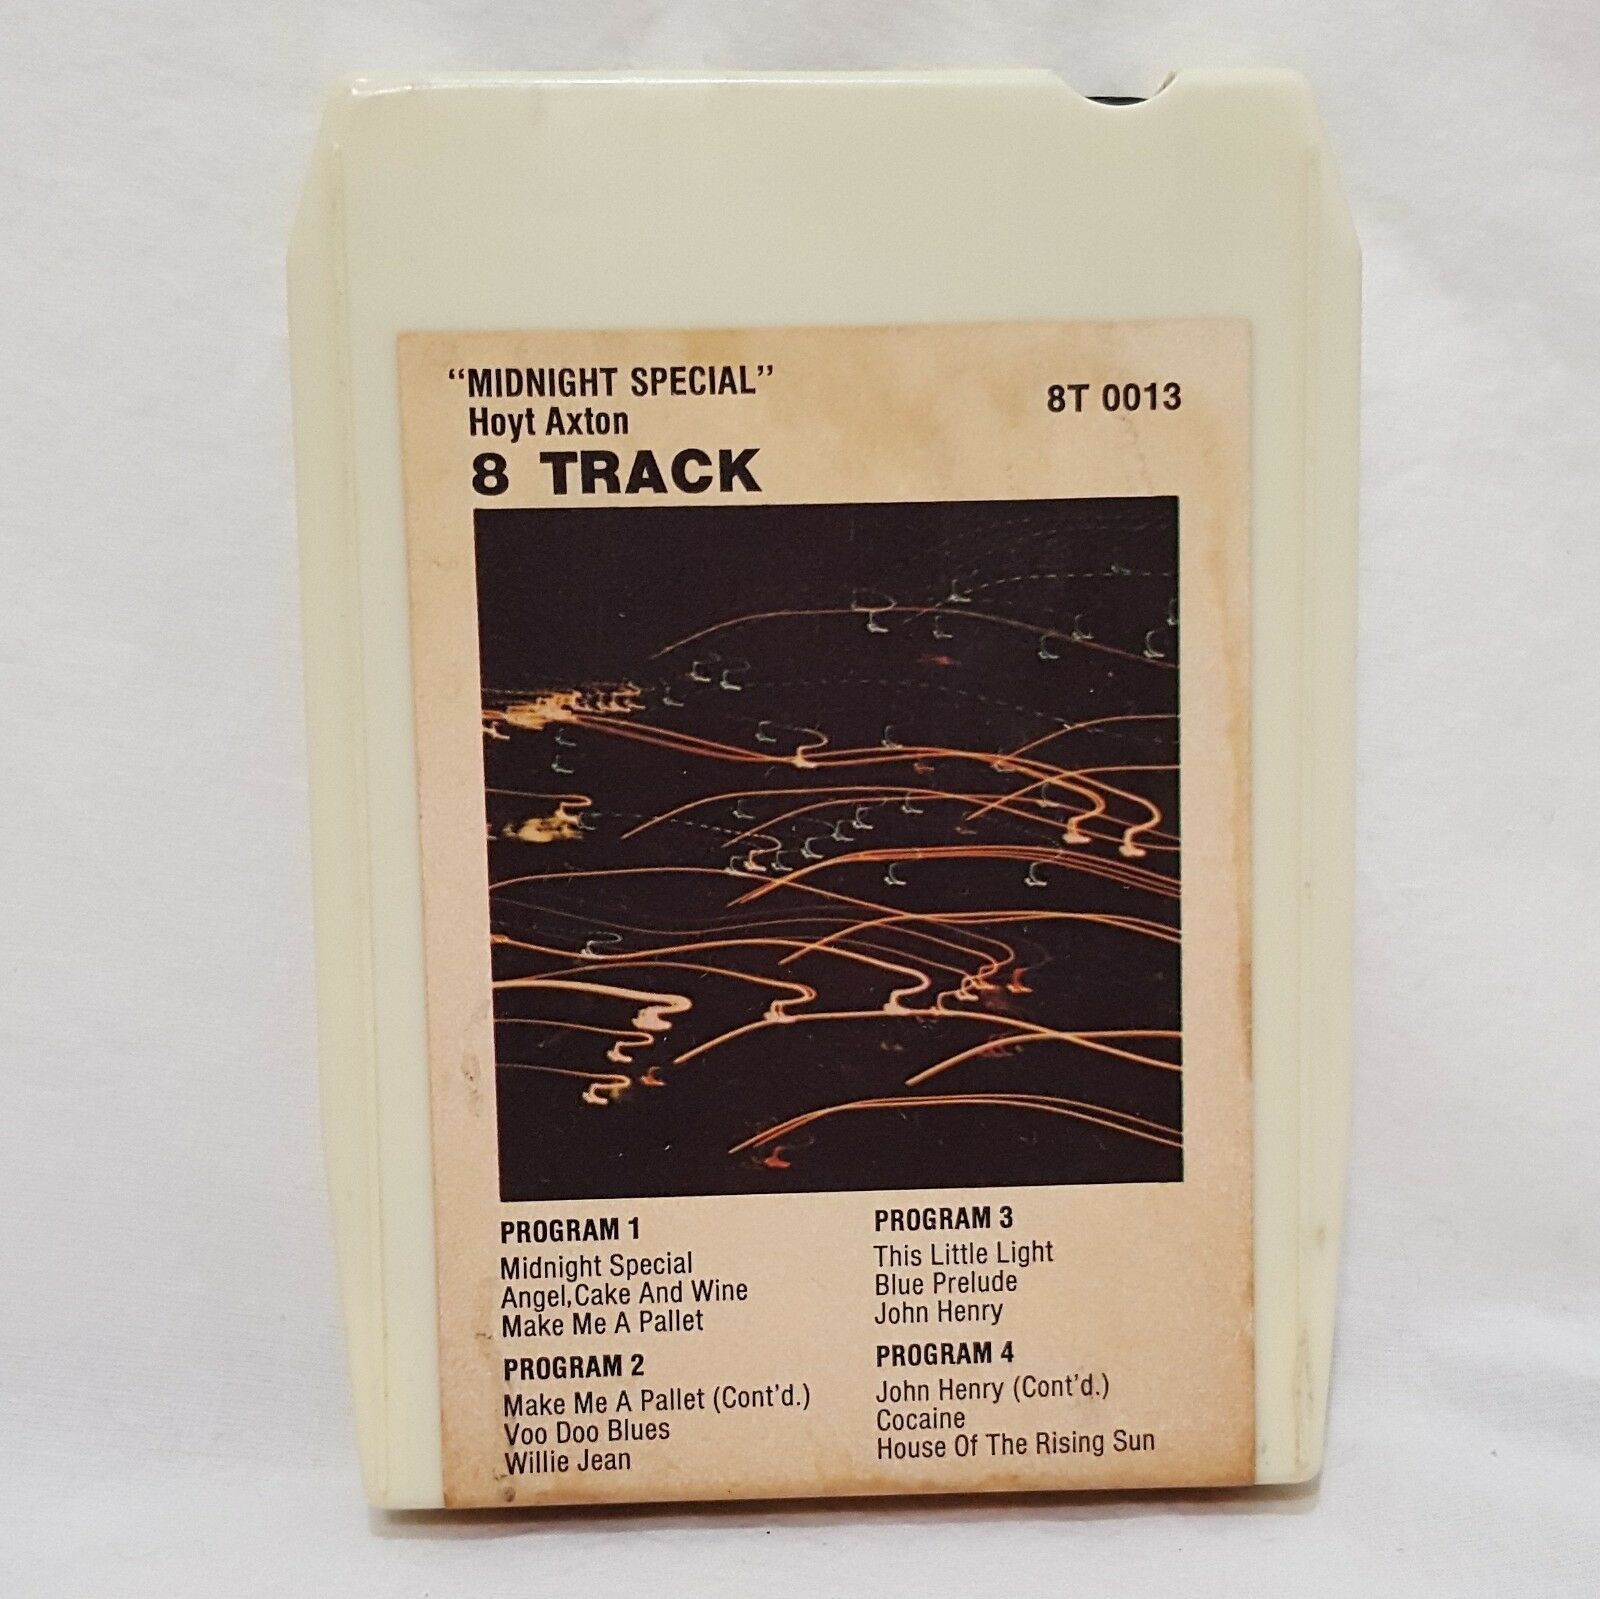 Primary image for Midnight Special Hoyt Axton 8 Track Tape Cartridge  8T 0013